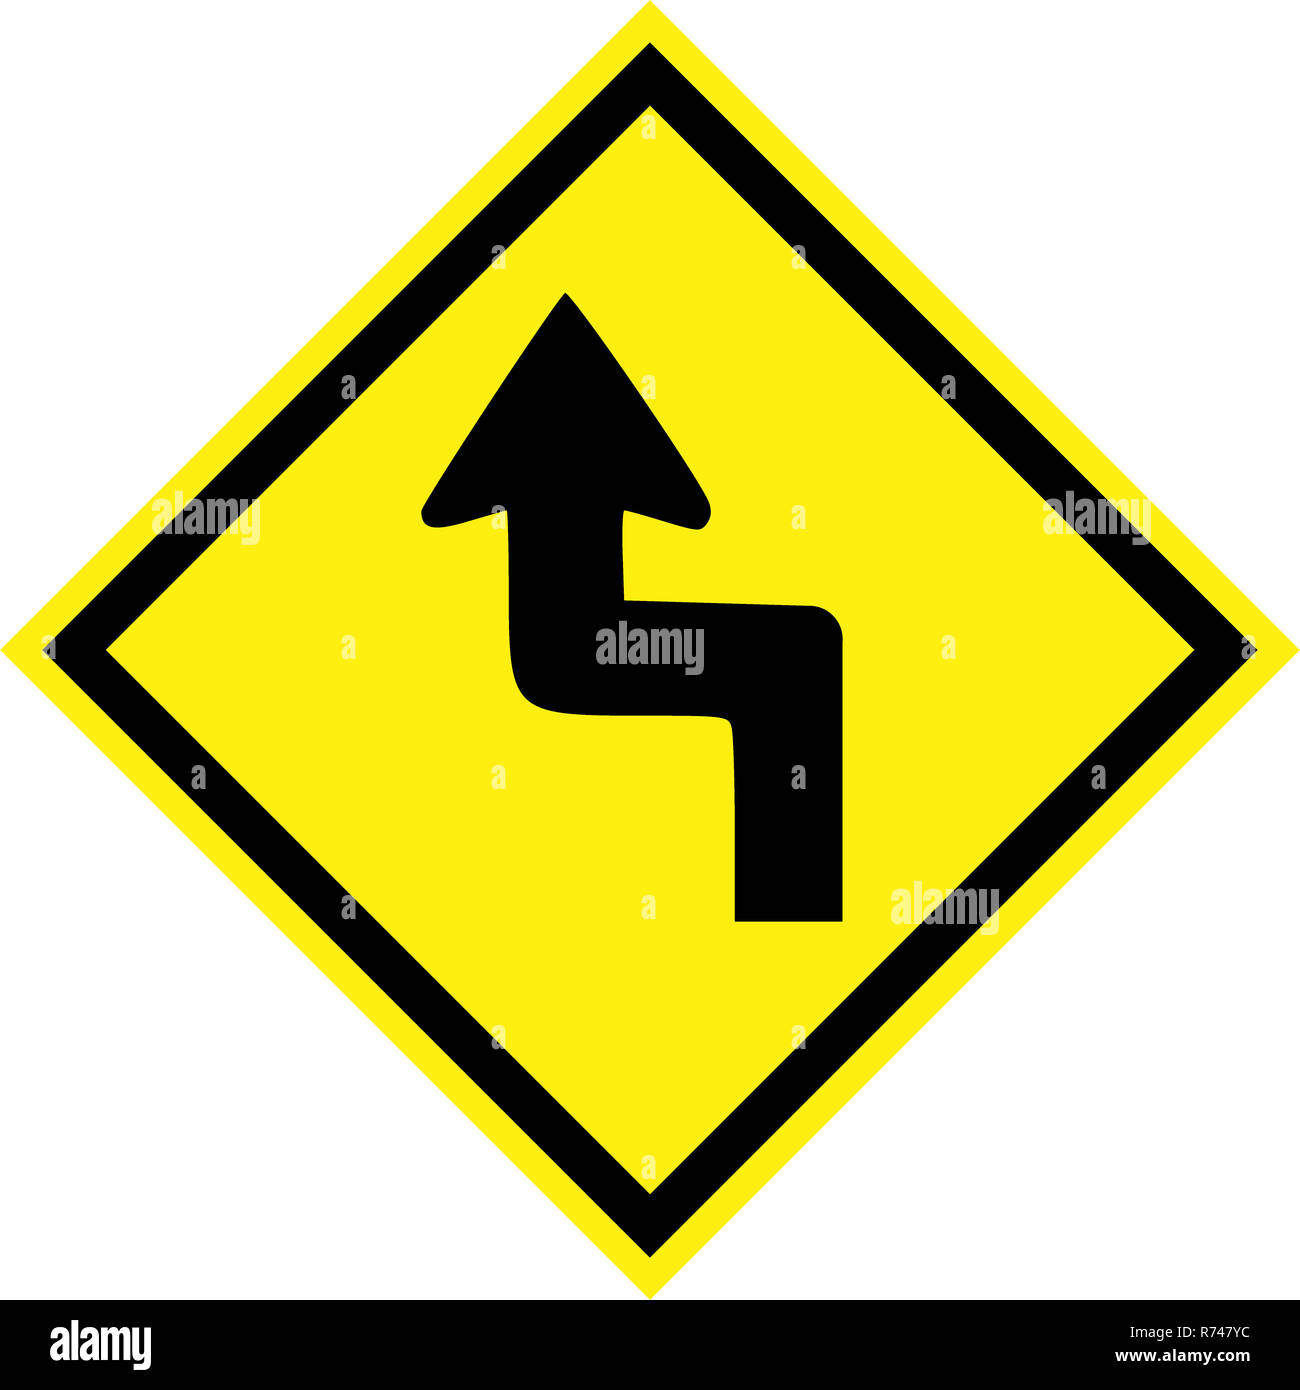 Yellow hazard sign with dangerous curves symbol Stock Photo